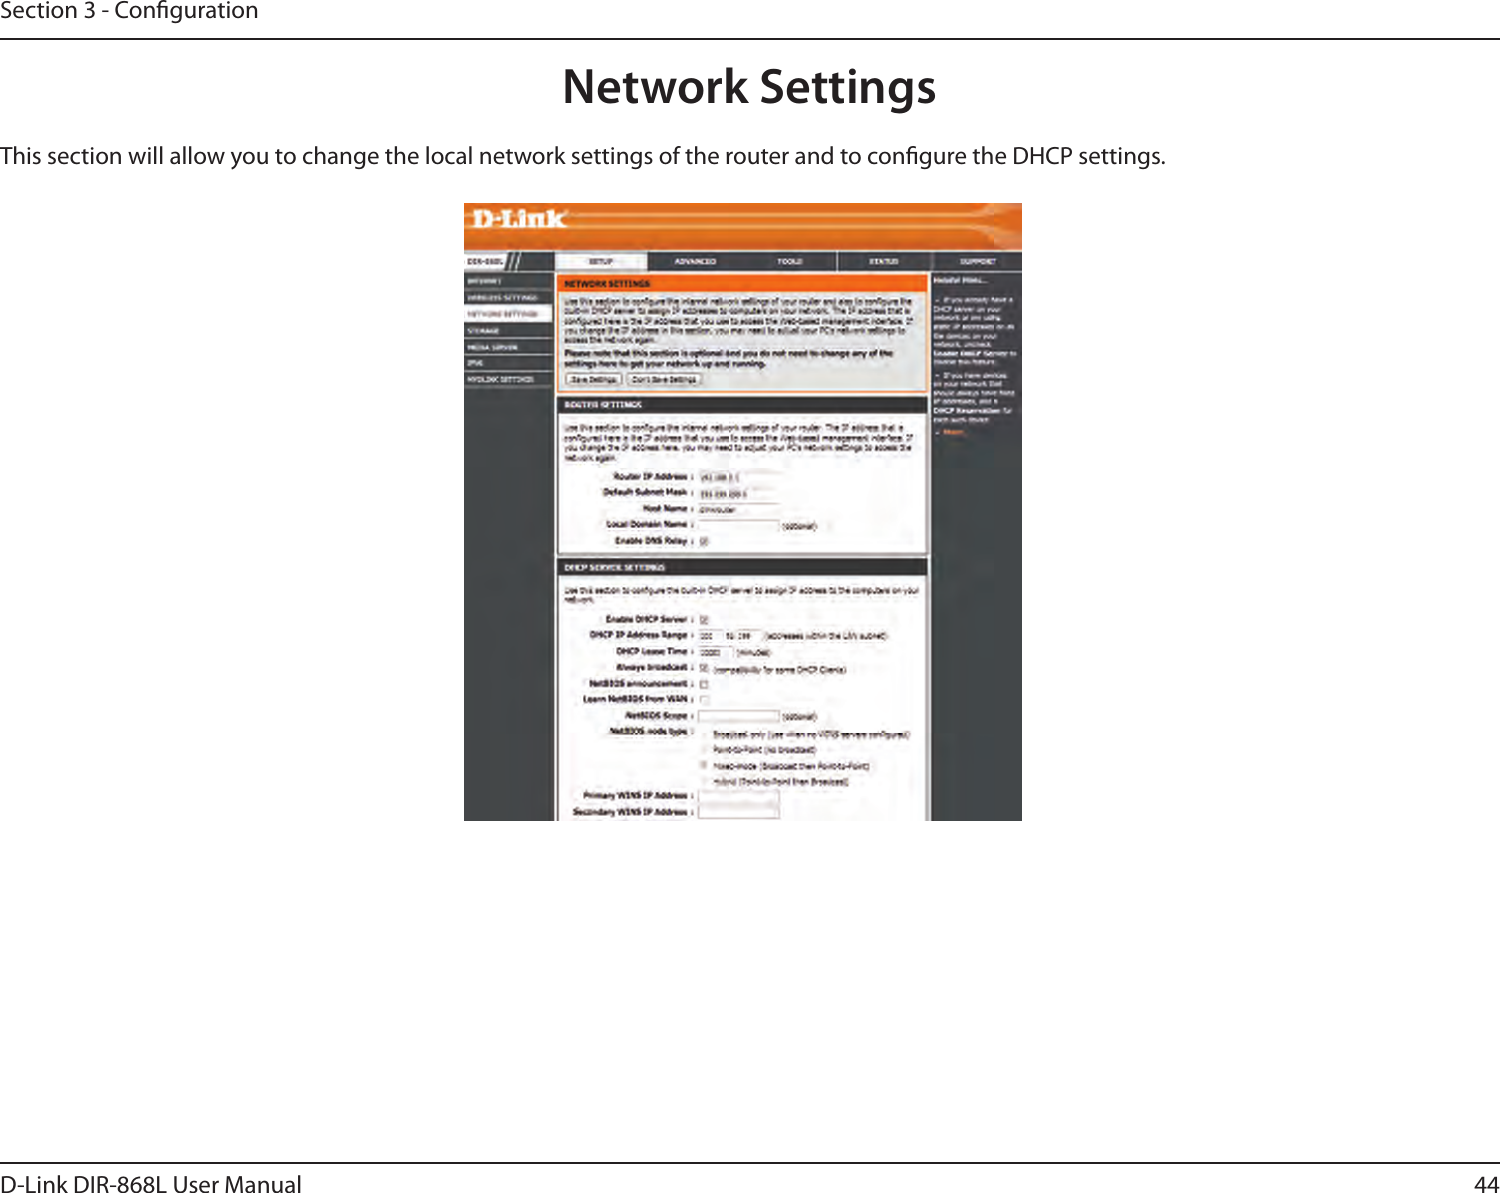 44D-Link DIR-868L User ManualSection 3 - CongurationThis section will allow you to change the local network settings of the router and to congure the DHCP settings.Network Settings